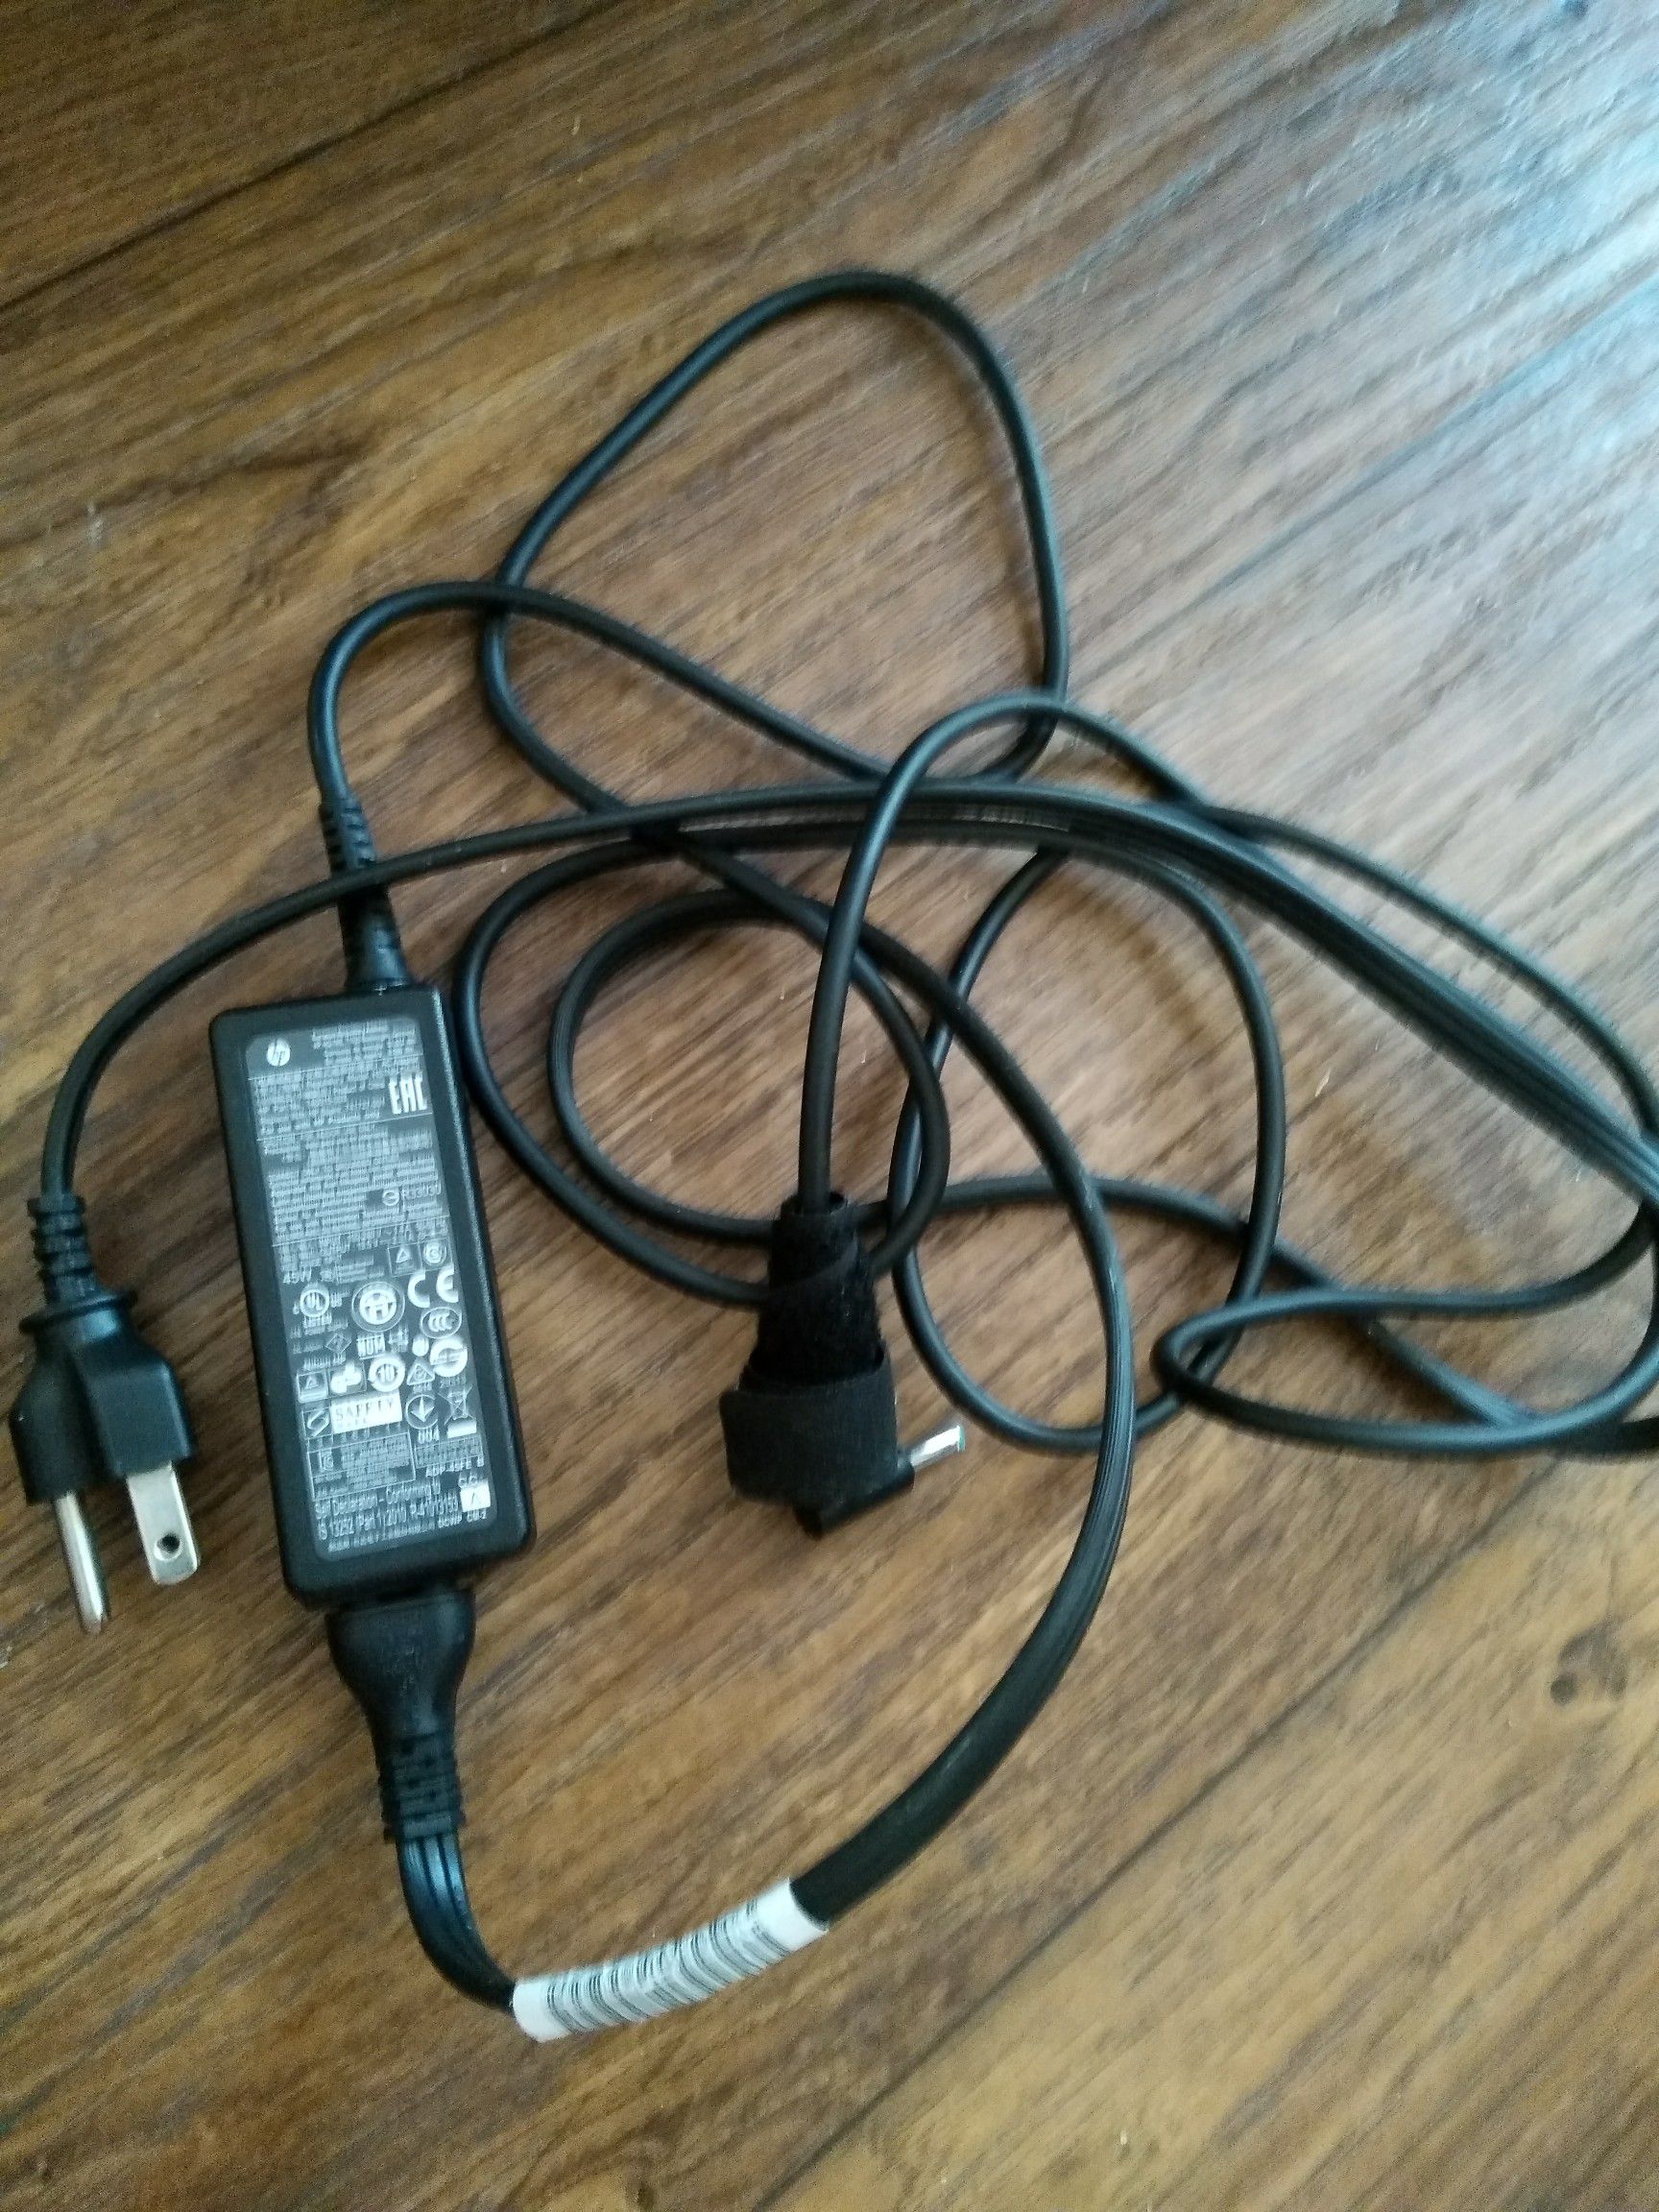 HP Laptop charger in (17030 N 49th street )